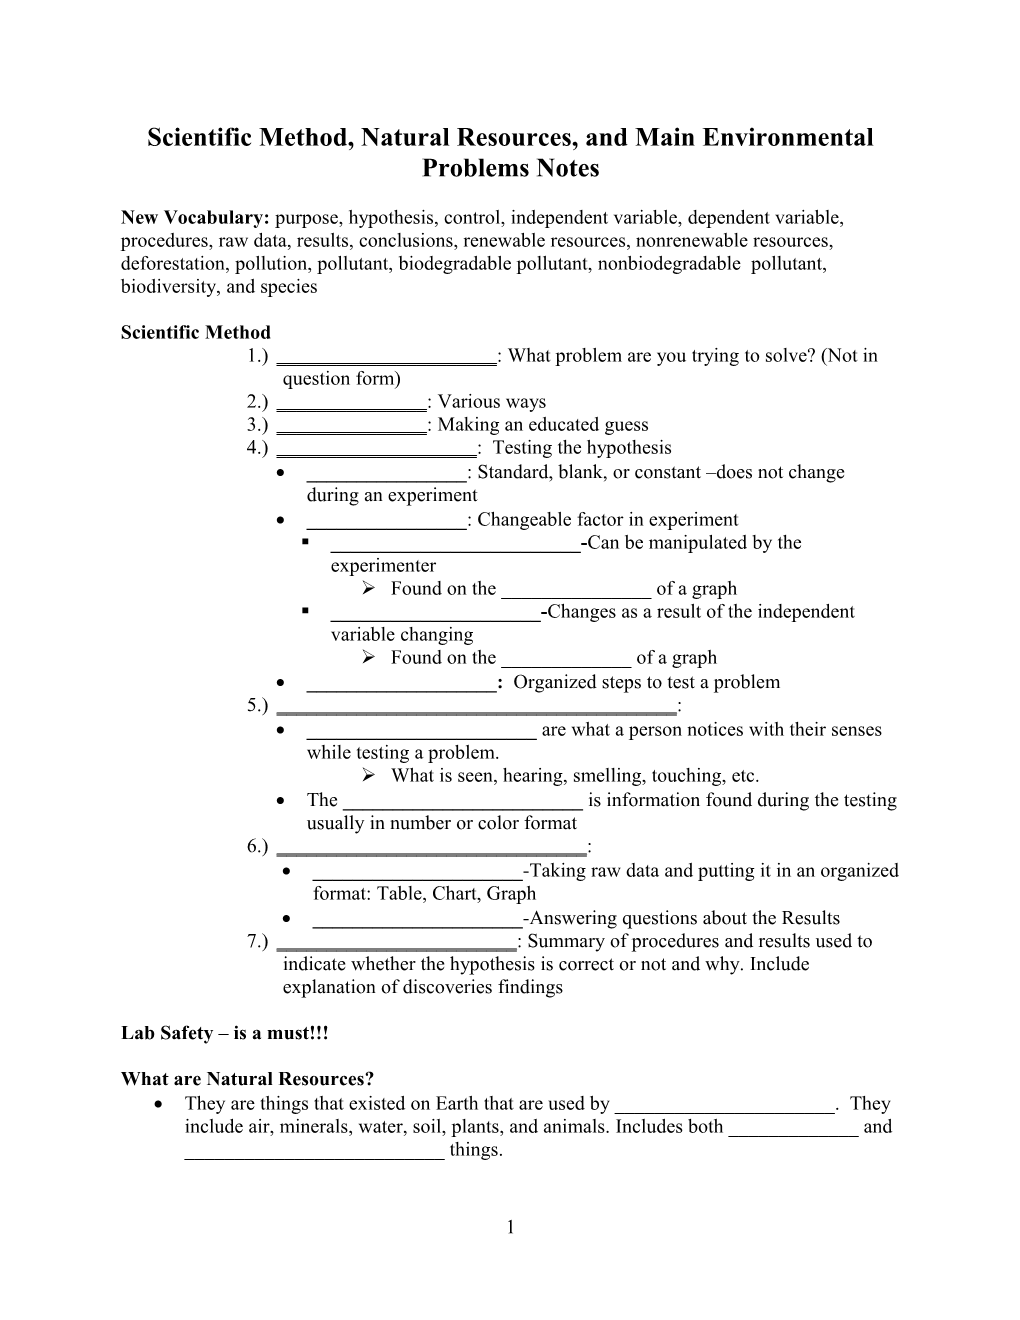 Scientific Method, Natural Resources, and Main Environmental Problems Notes